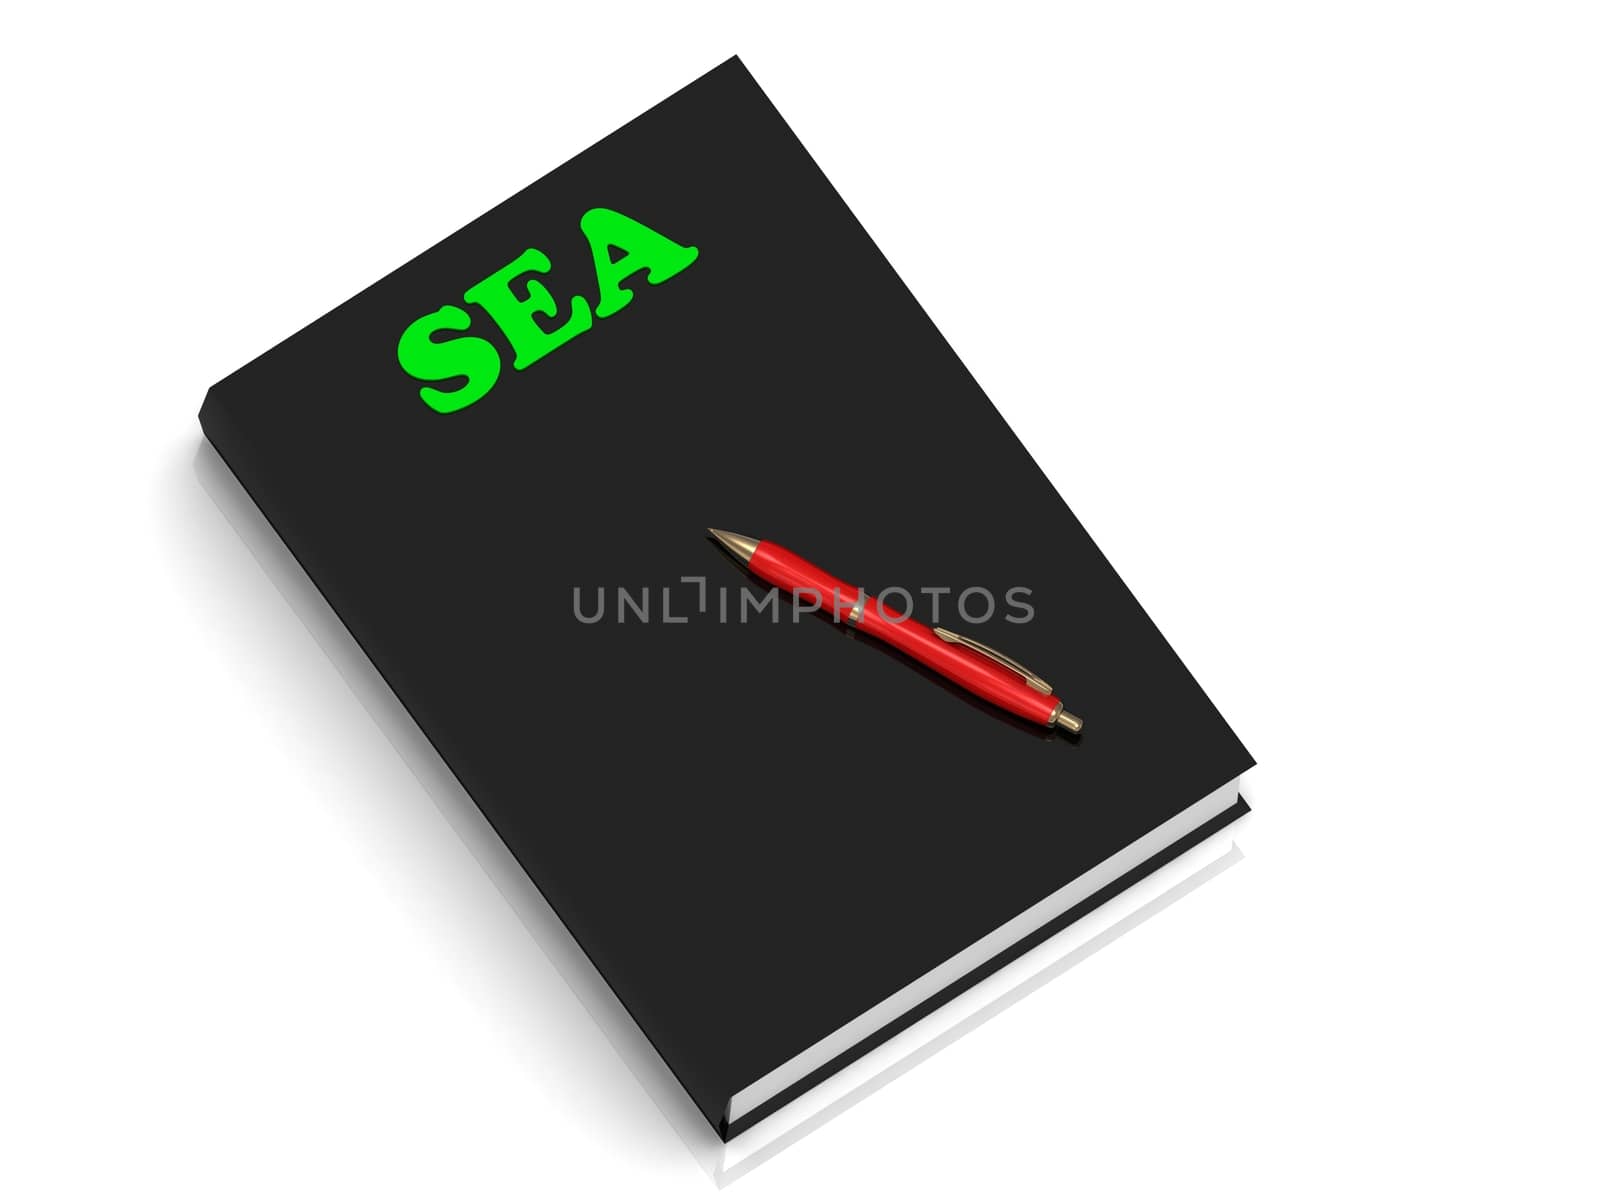 SEA- inscription of green letters on black book by GreenMost